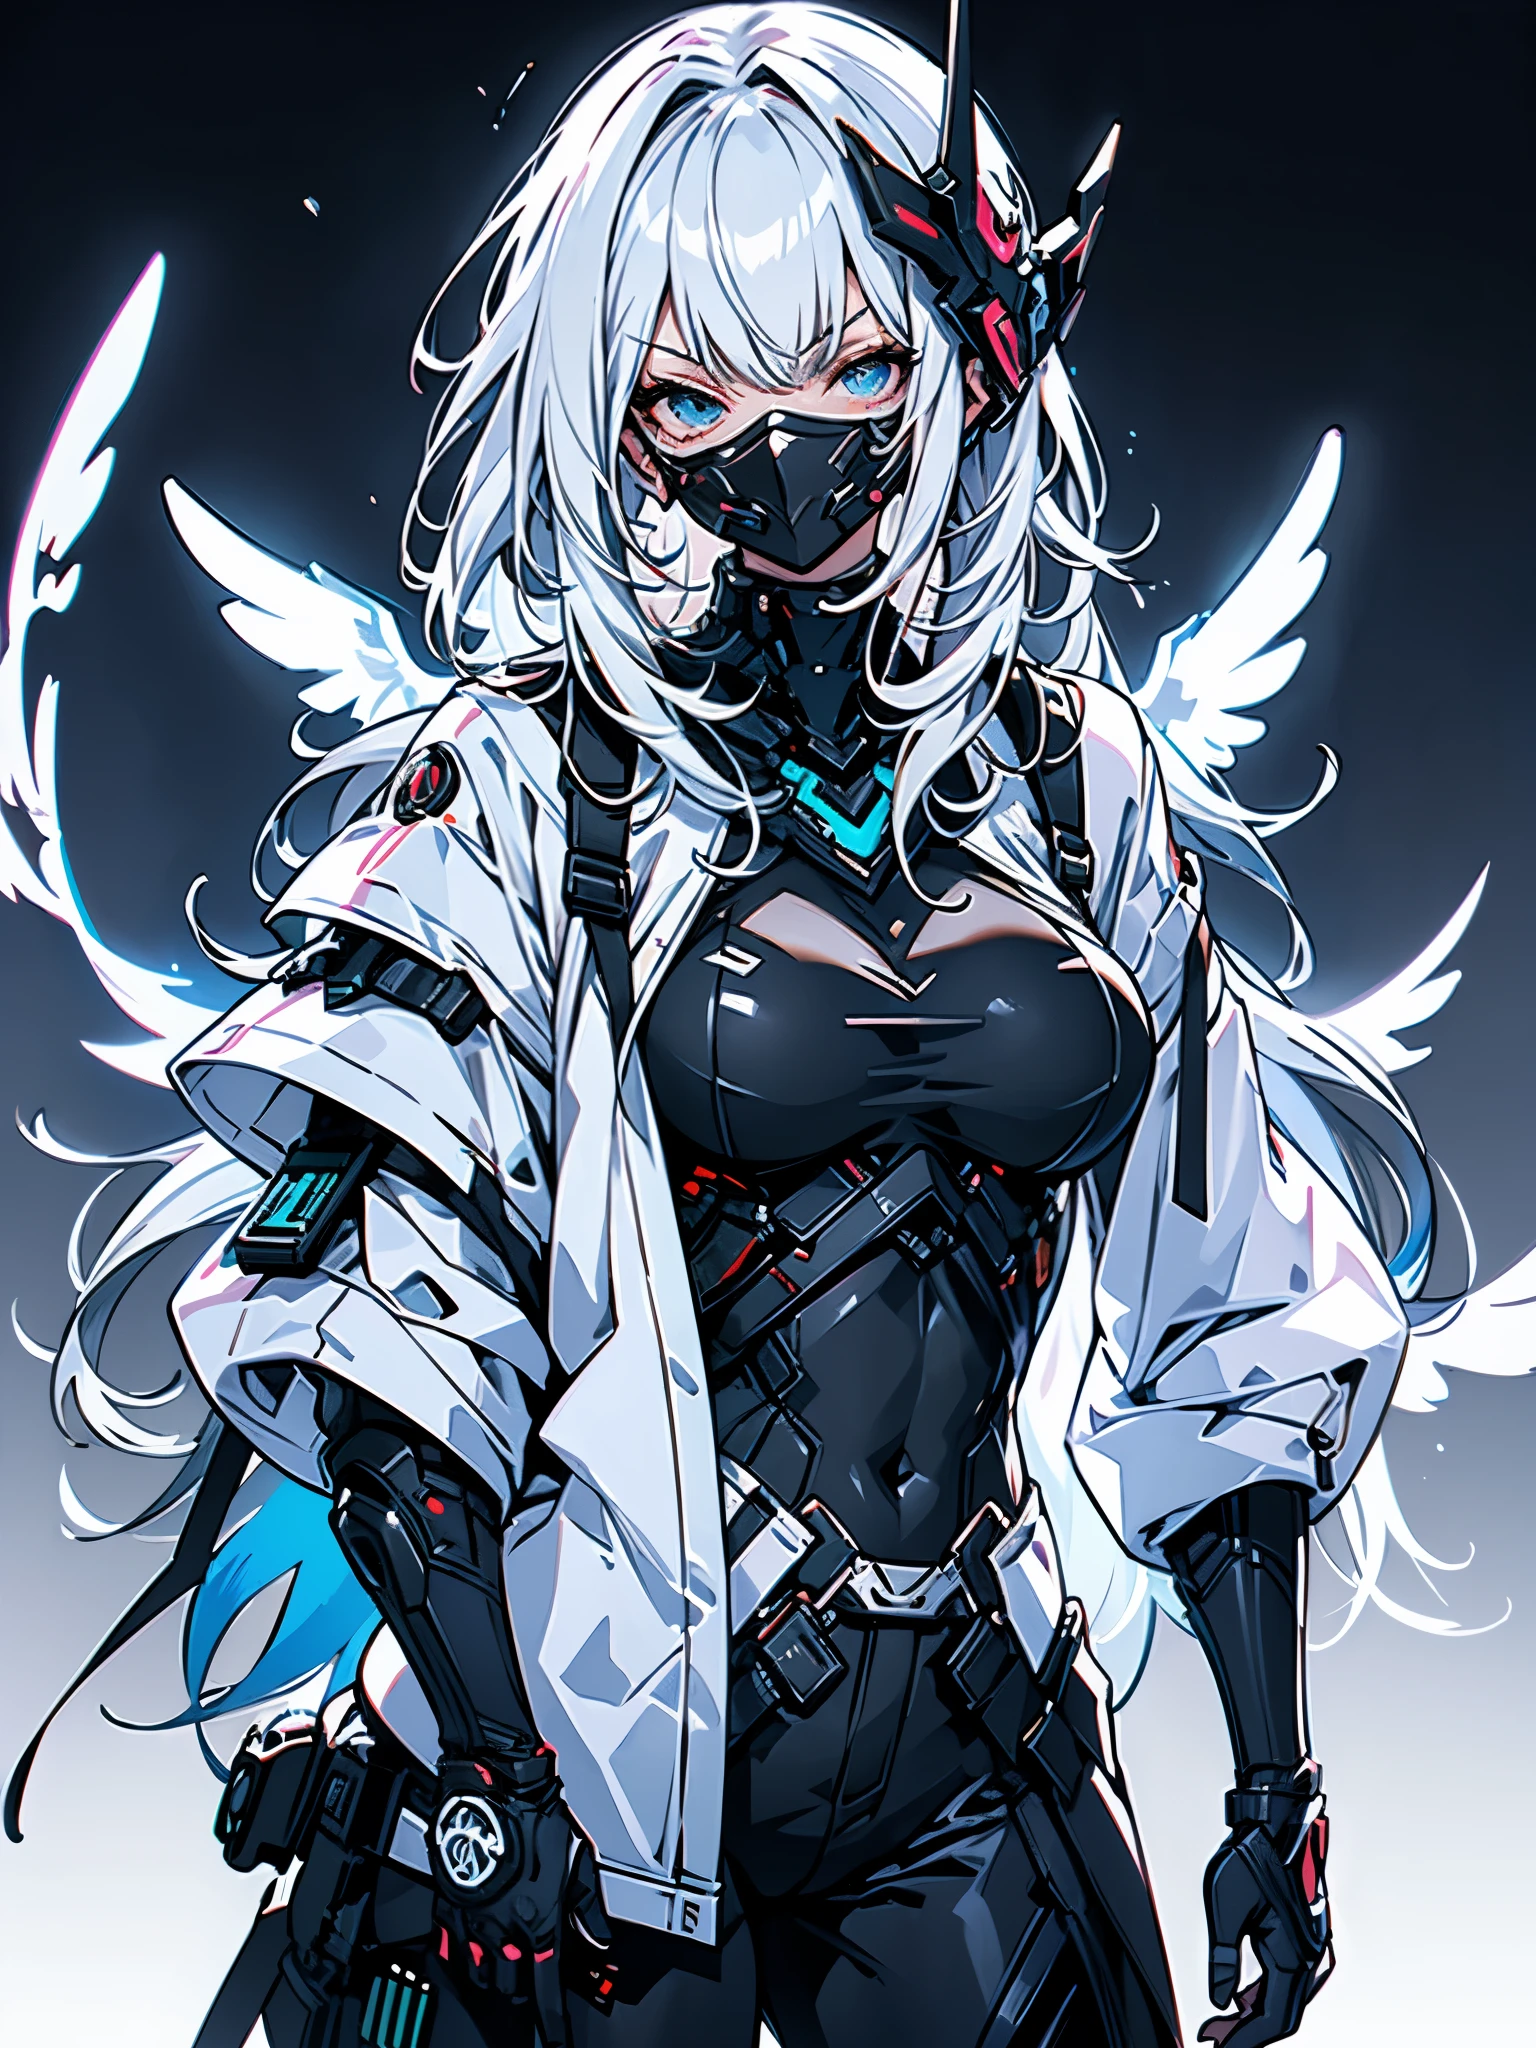 gilr alone, white hair, long hair, straight hair, dark blue eyes, dressed, tech jacket, thighs showing, neckleace, breasts small, big-ass, thick muscle coxa, (((girl equipped with technological mask and technological accessories))), white high top sneakers, background with cool colors neon and black, fully body,
